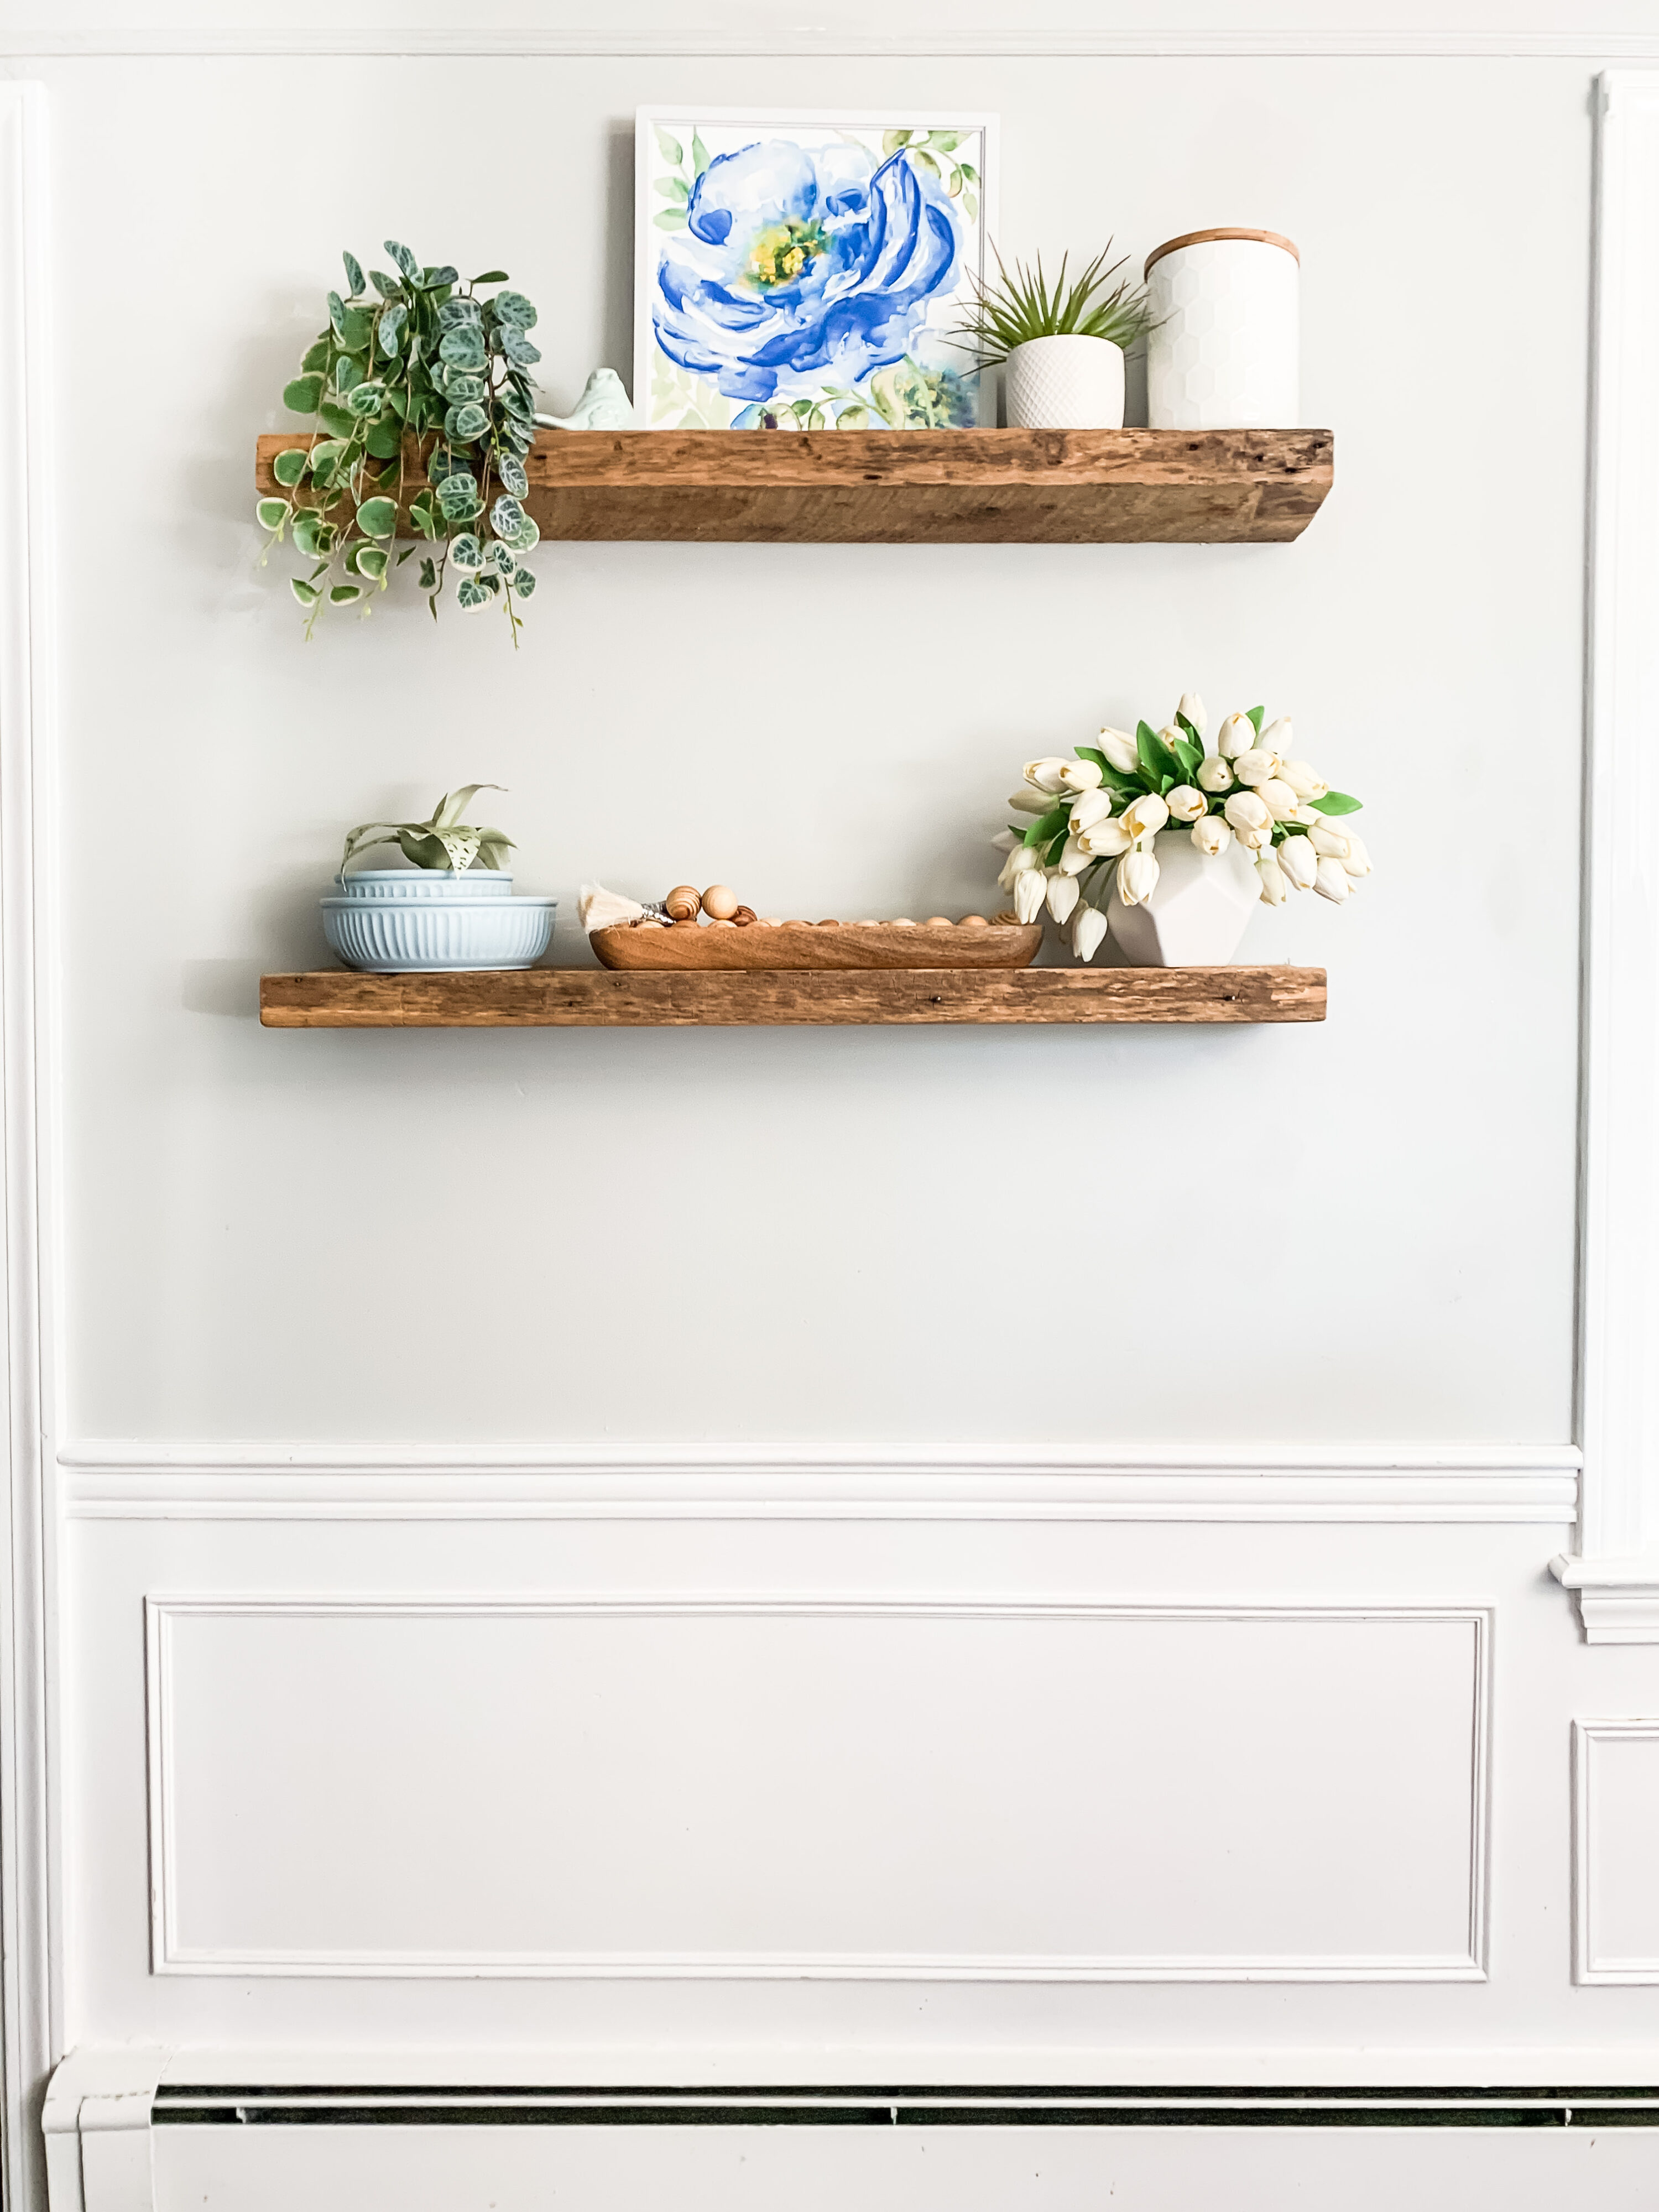 2 rustic floating wooden shelves, holding various pots of plants and swirly blue canvas art